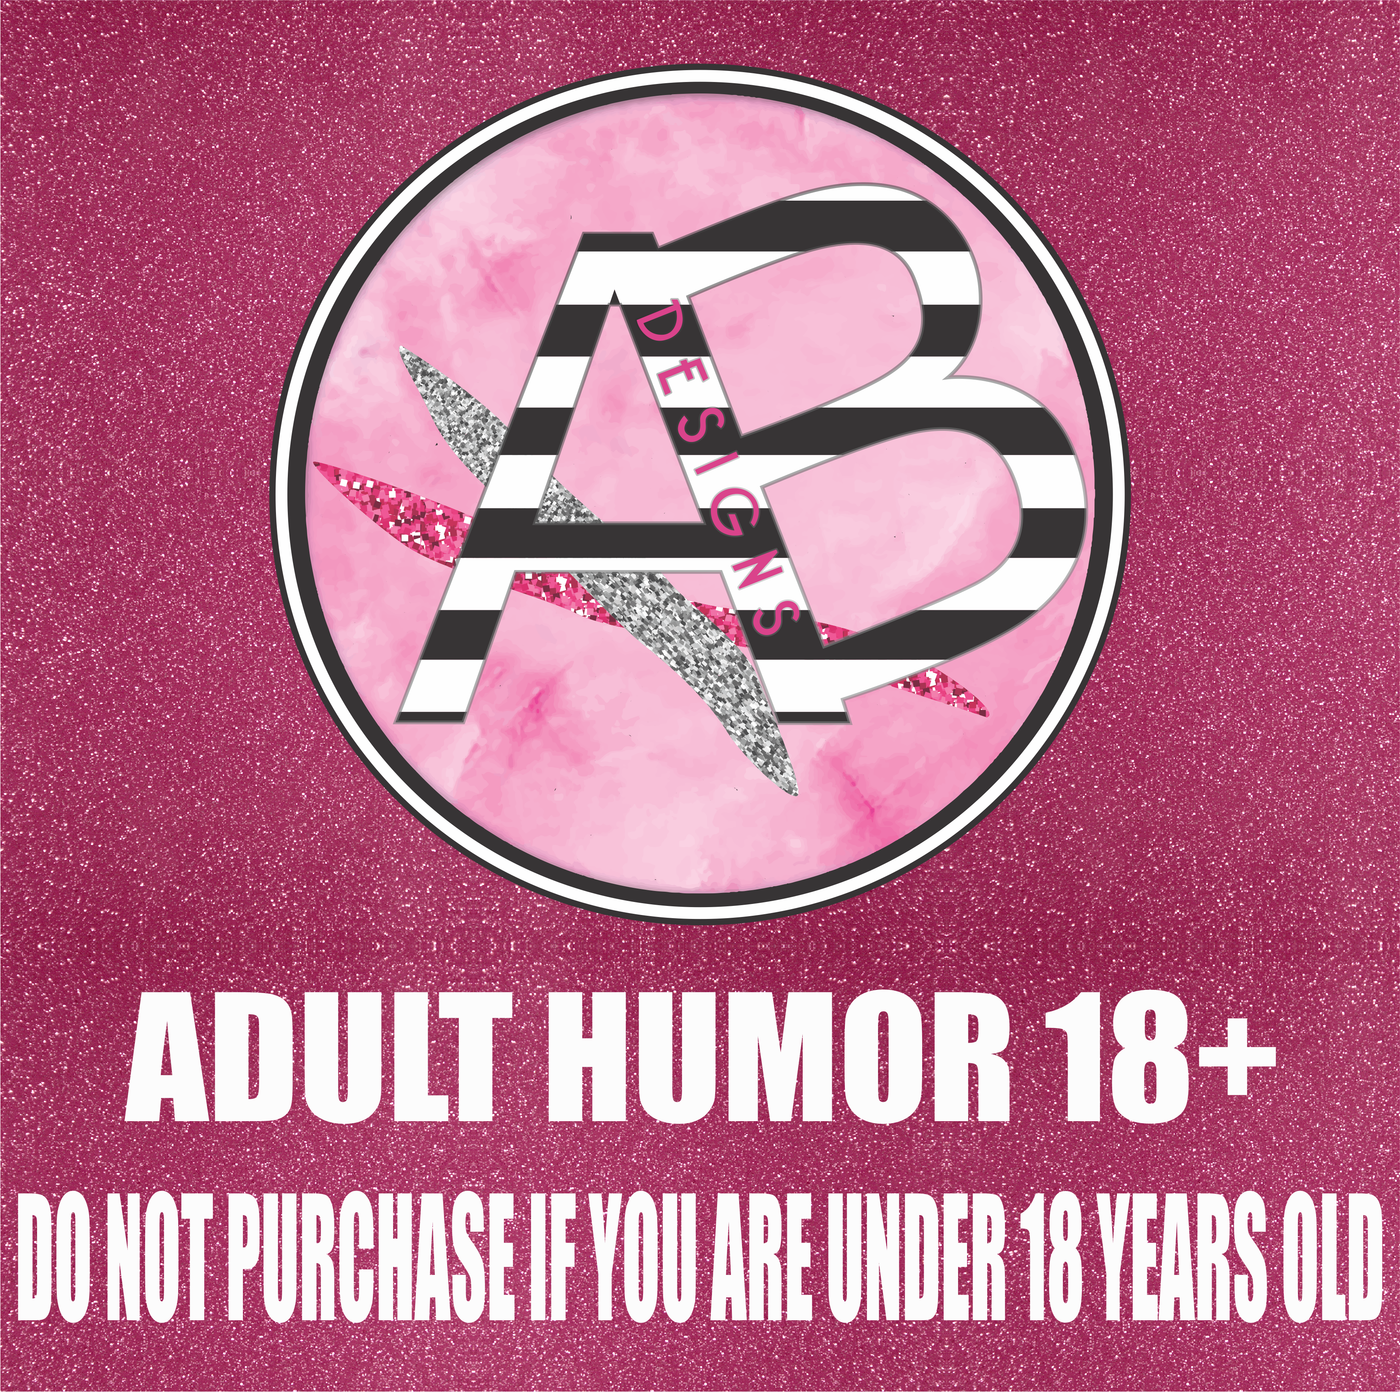 Adhesive Patterned Vinyl - Adult Humor 24 *** 18 YEARS OLD TO VIEW ***